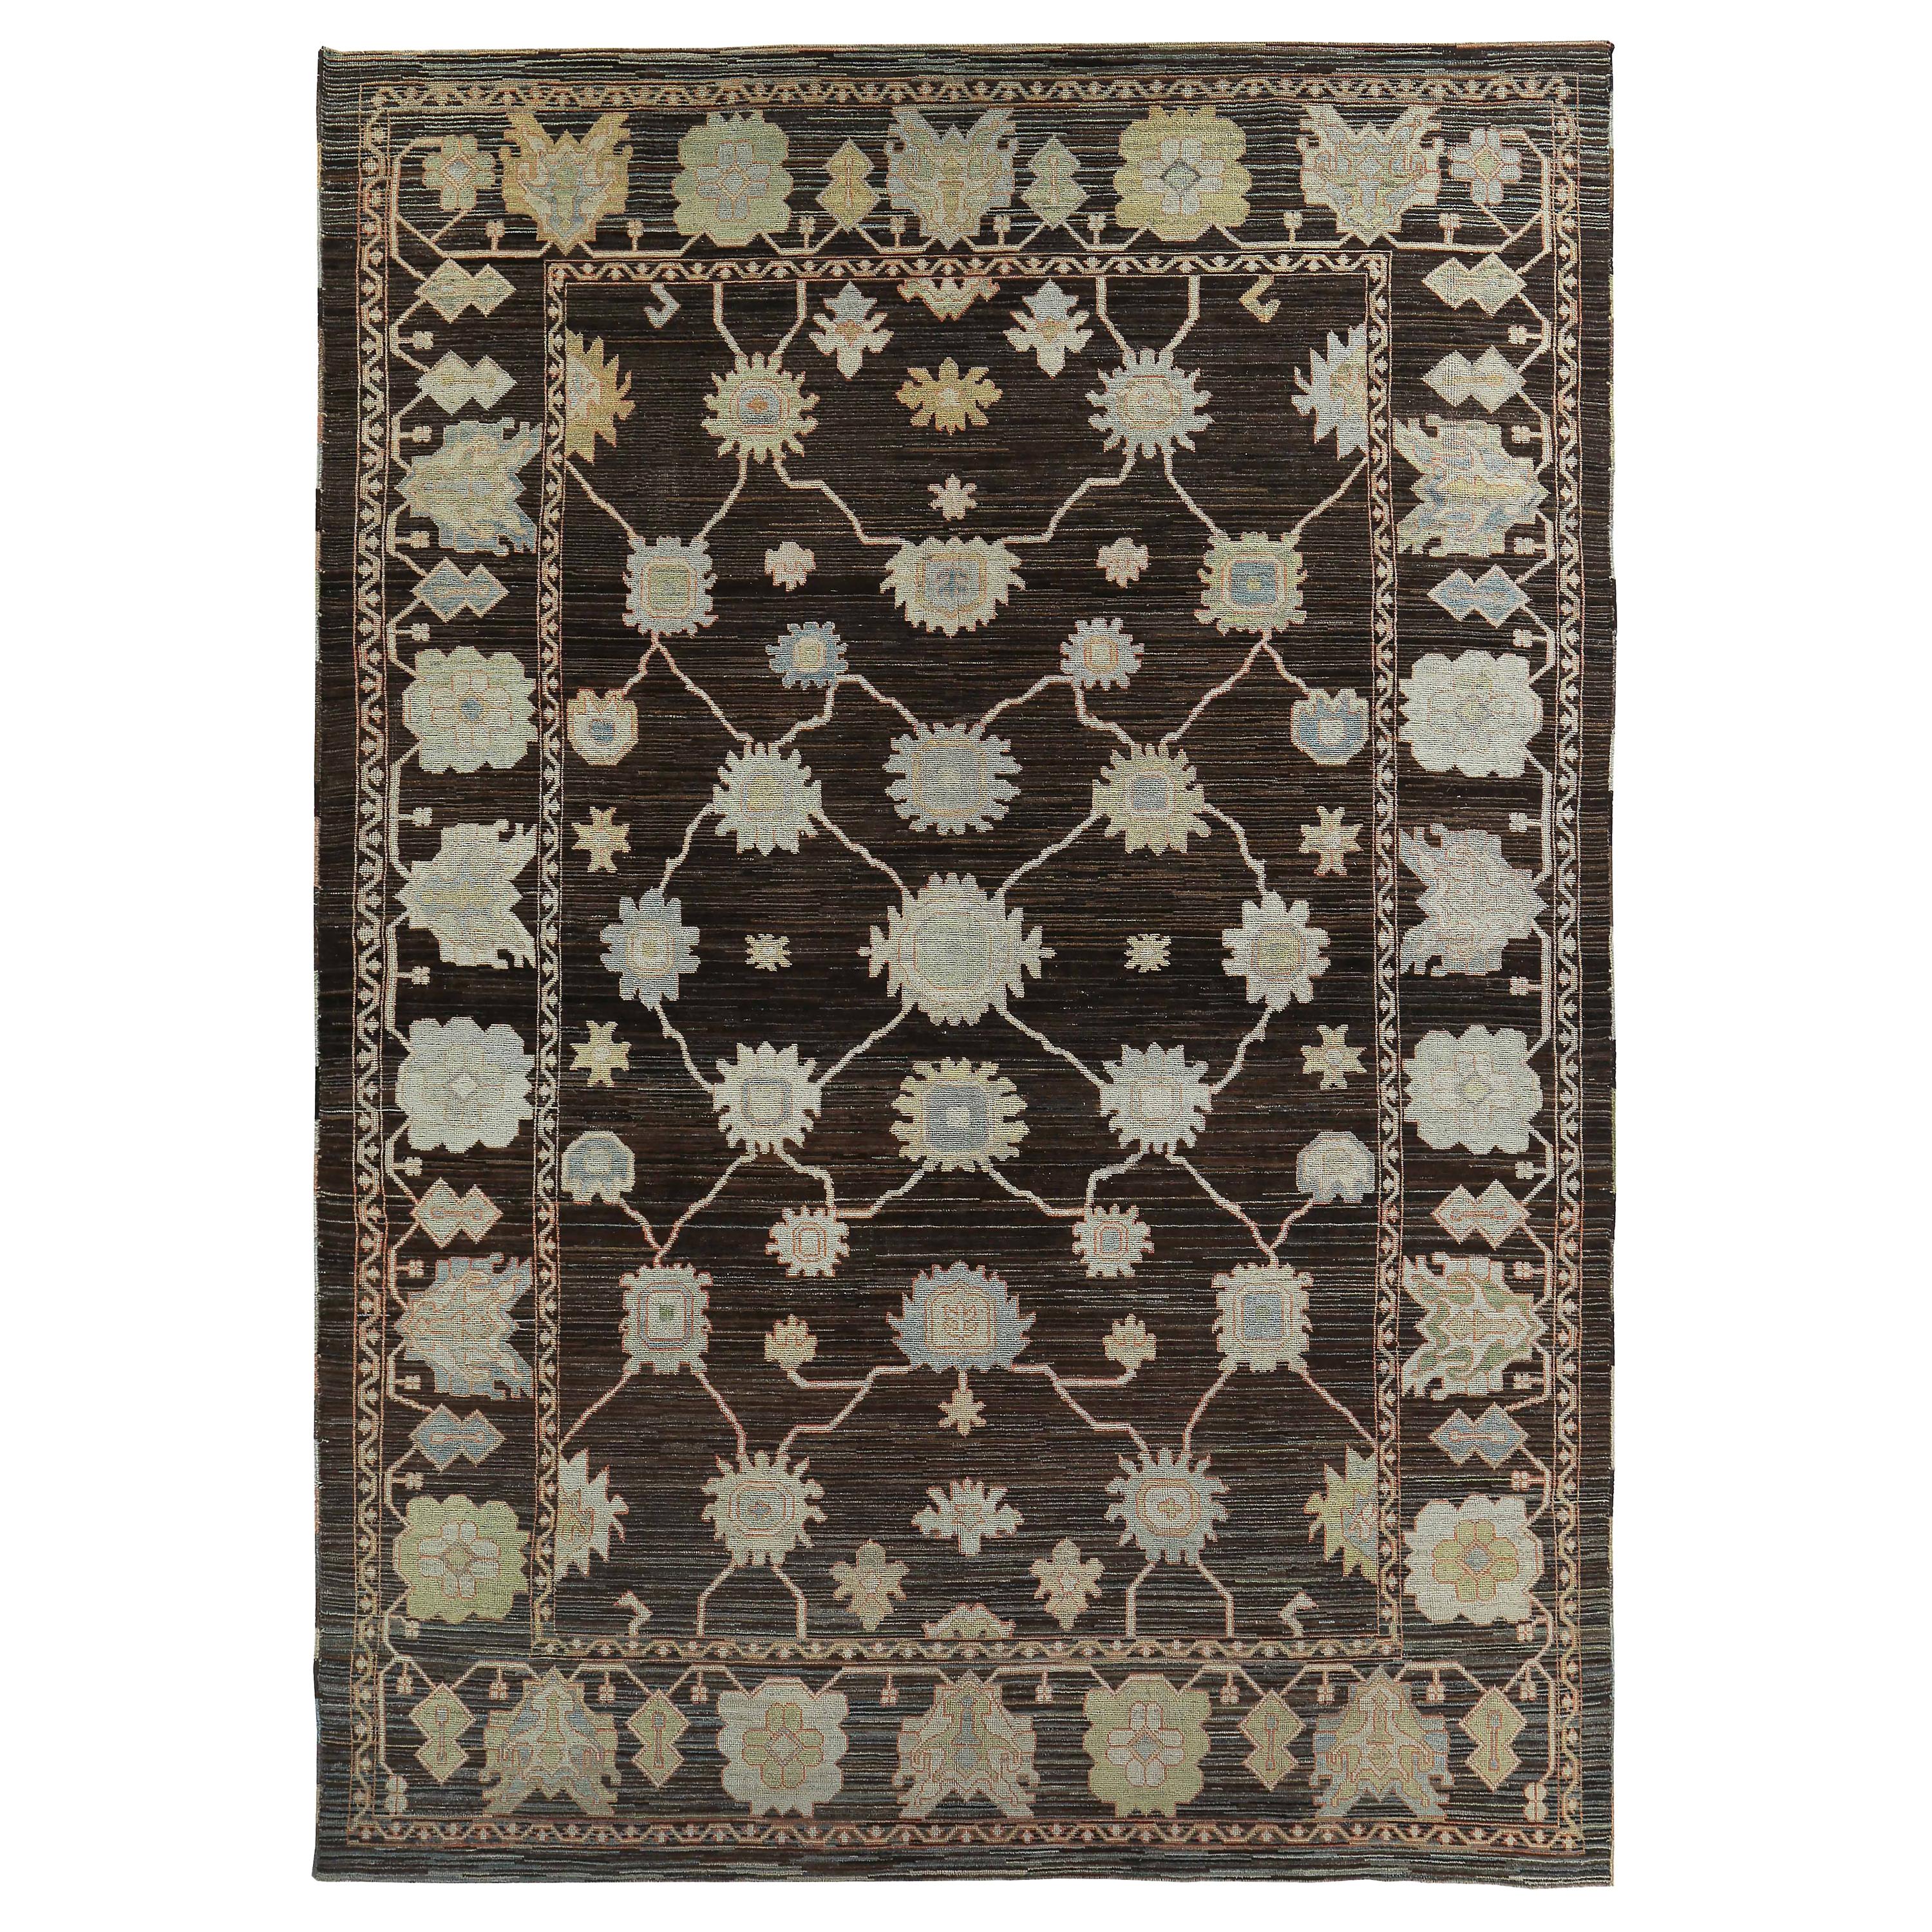 New Turkish Oushak Rug with Green & Light Blue Floral Details on Brown Field For Sale